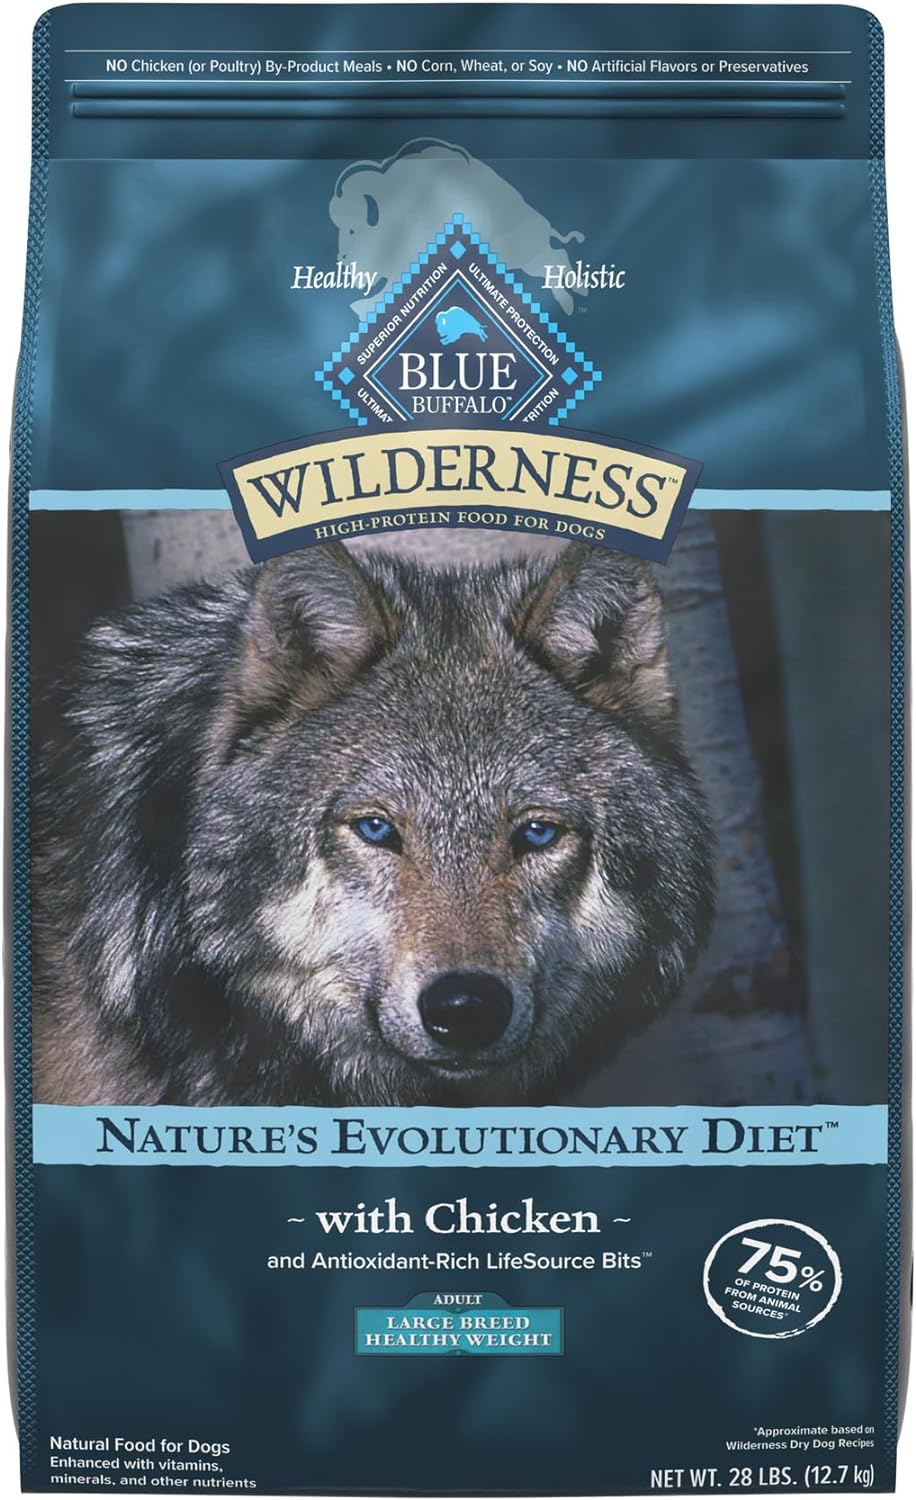 Blue Wilderness Adult Large Breed Healthy Weight Chicken Recipe Grain-Free Dry Dog Food – Gallery Image 1